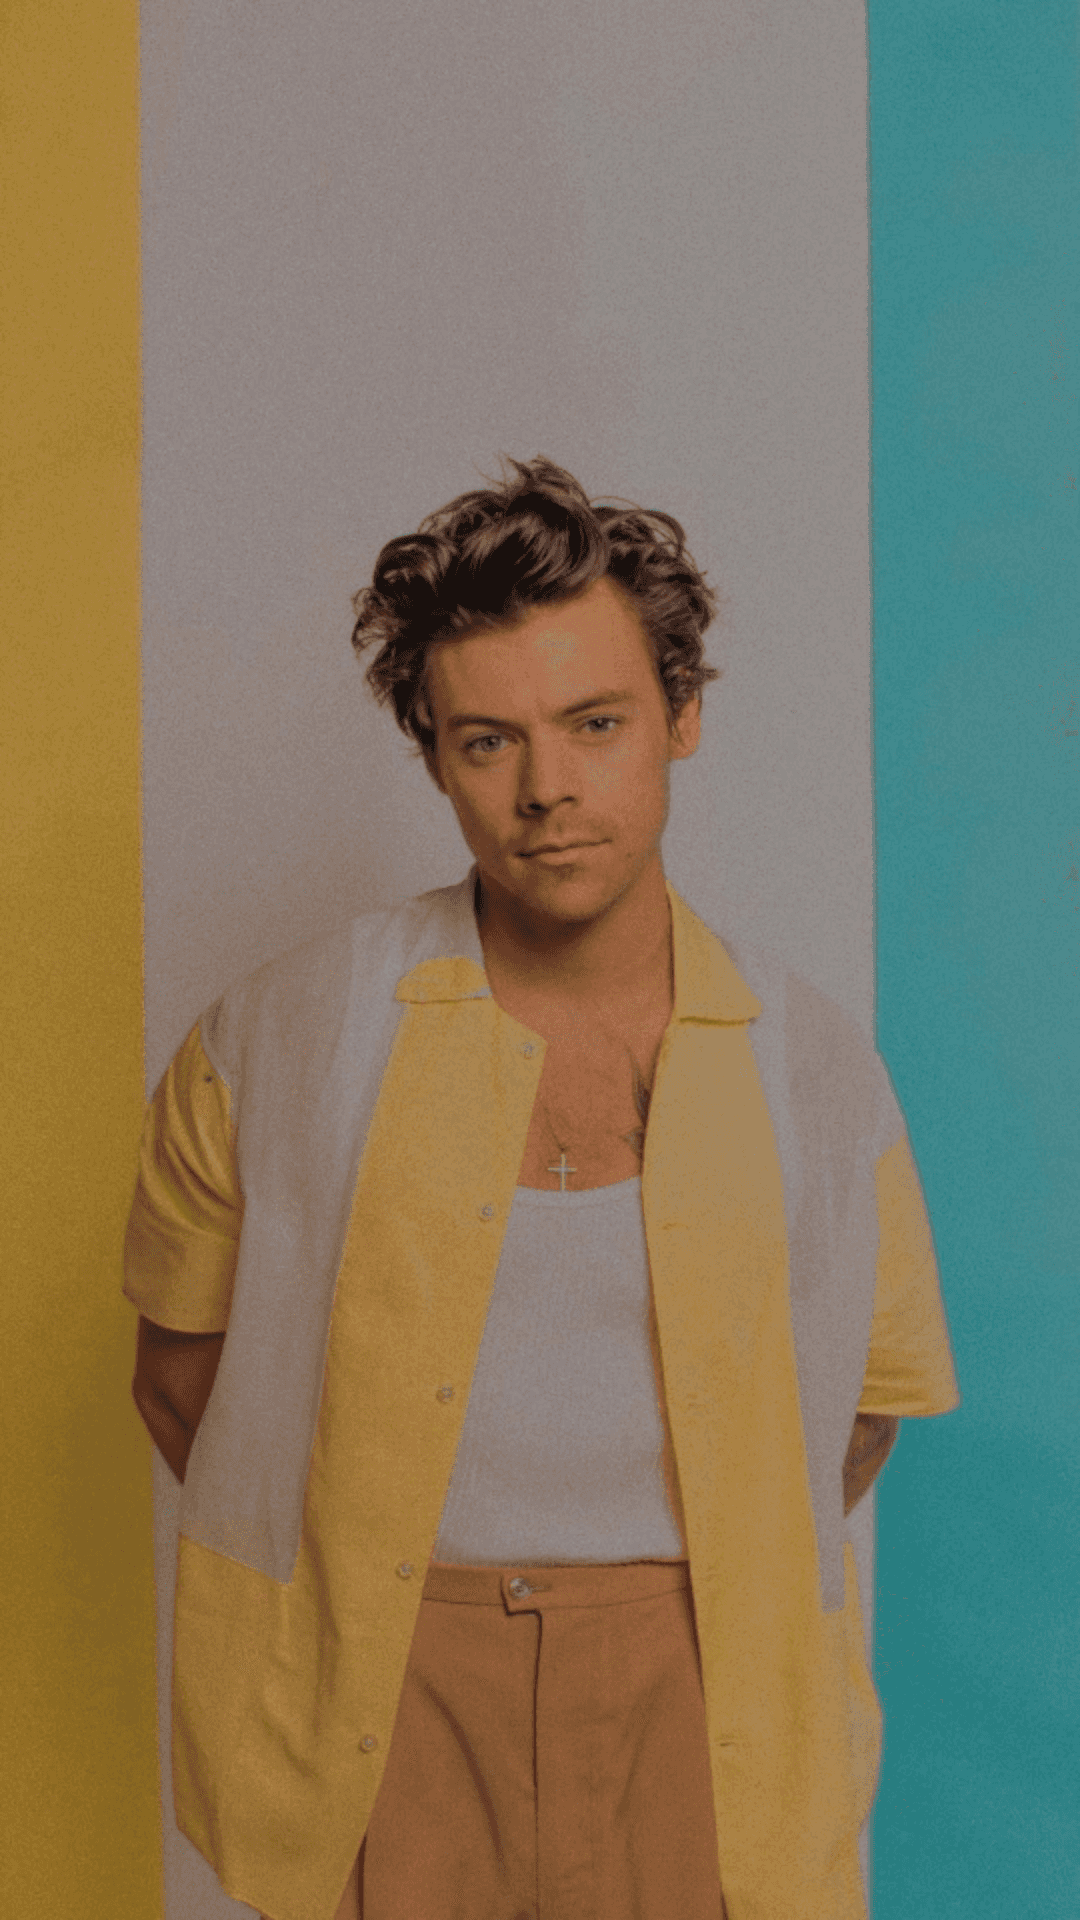 Harry Styles - A Talented and Multi-Faceted Artist